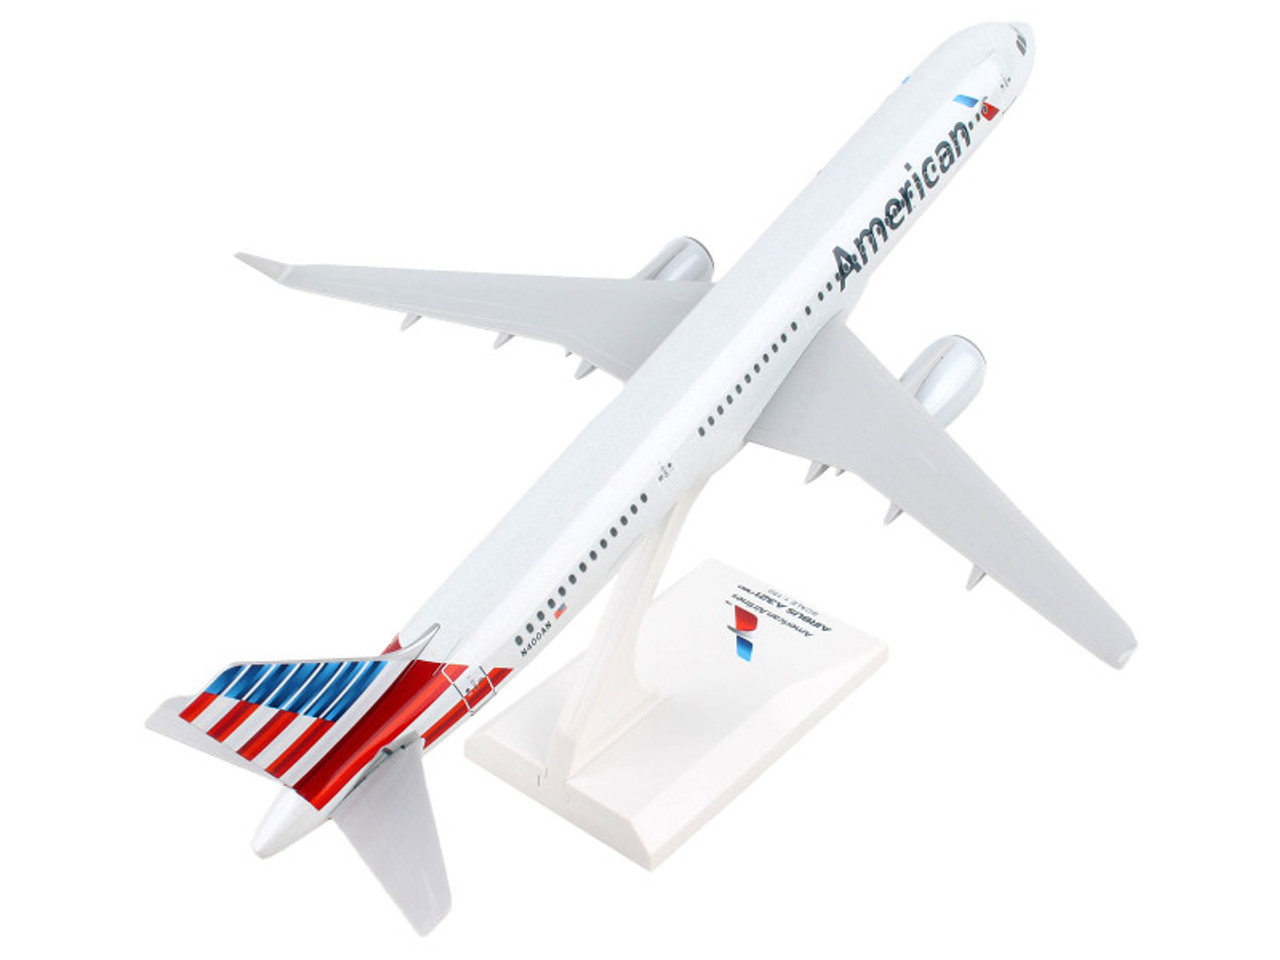 Airbus A321neo Commercial Aircraft "American Airlines" (N400AN) Gray with Red and Blue Tail (Snap-Fit) 1/150 Plastic Model by Skymarks